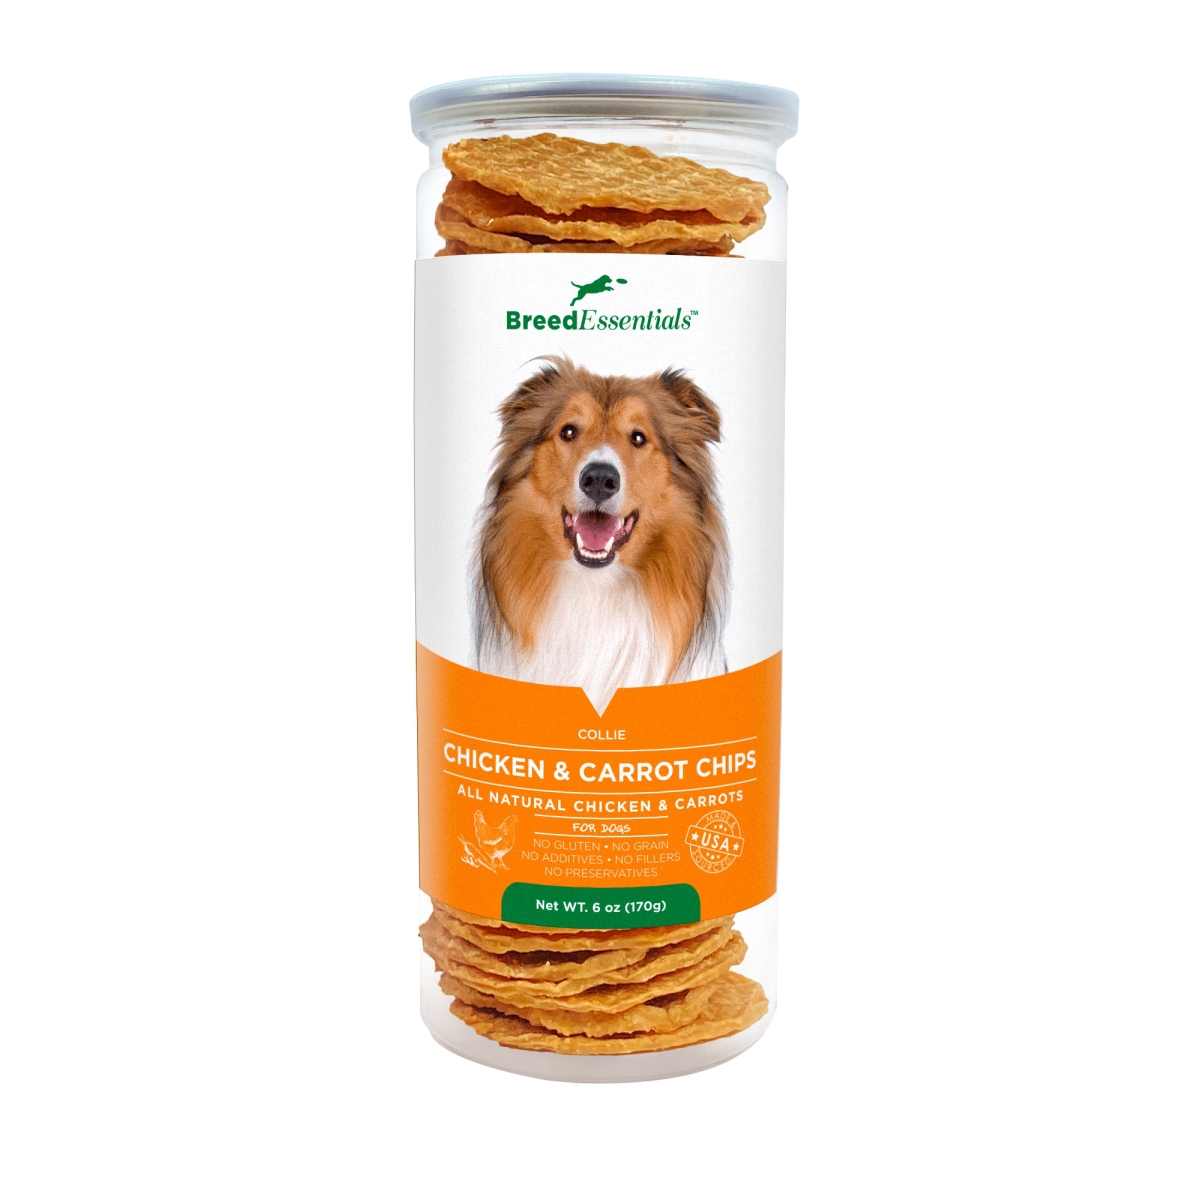 Picture of Breed Essentials 197247002130 6 oz Chicken & Carrot Chips - Collie